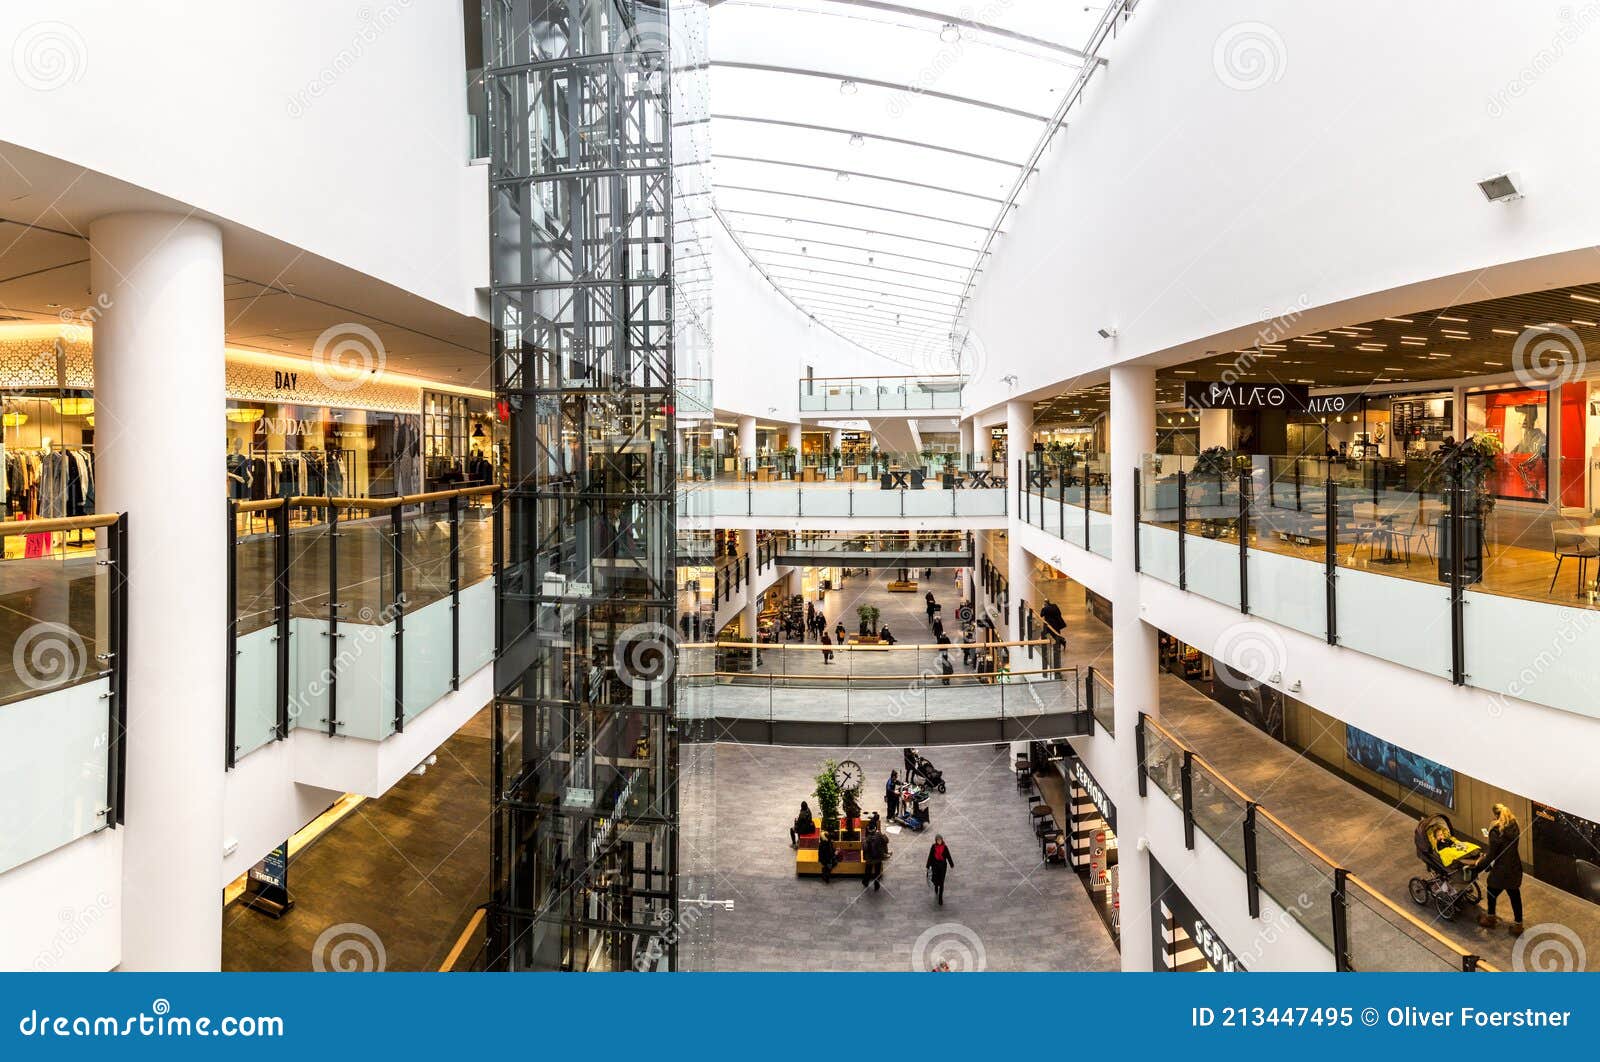 Hover grill vokal Frederiksberg Centret Shopping Mall in Copenhagen, Denmark Editorial Image  - Image of hall, architecture: 213447495